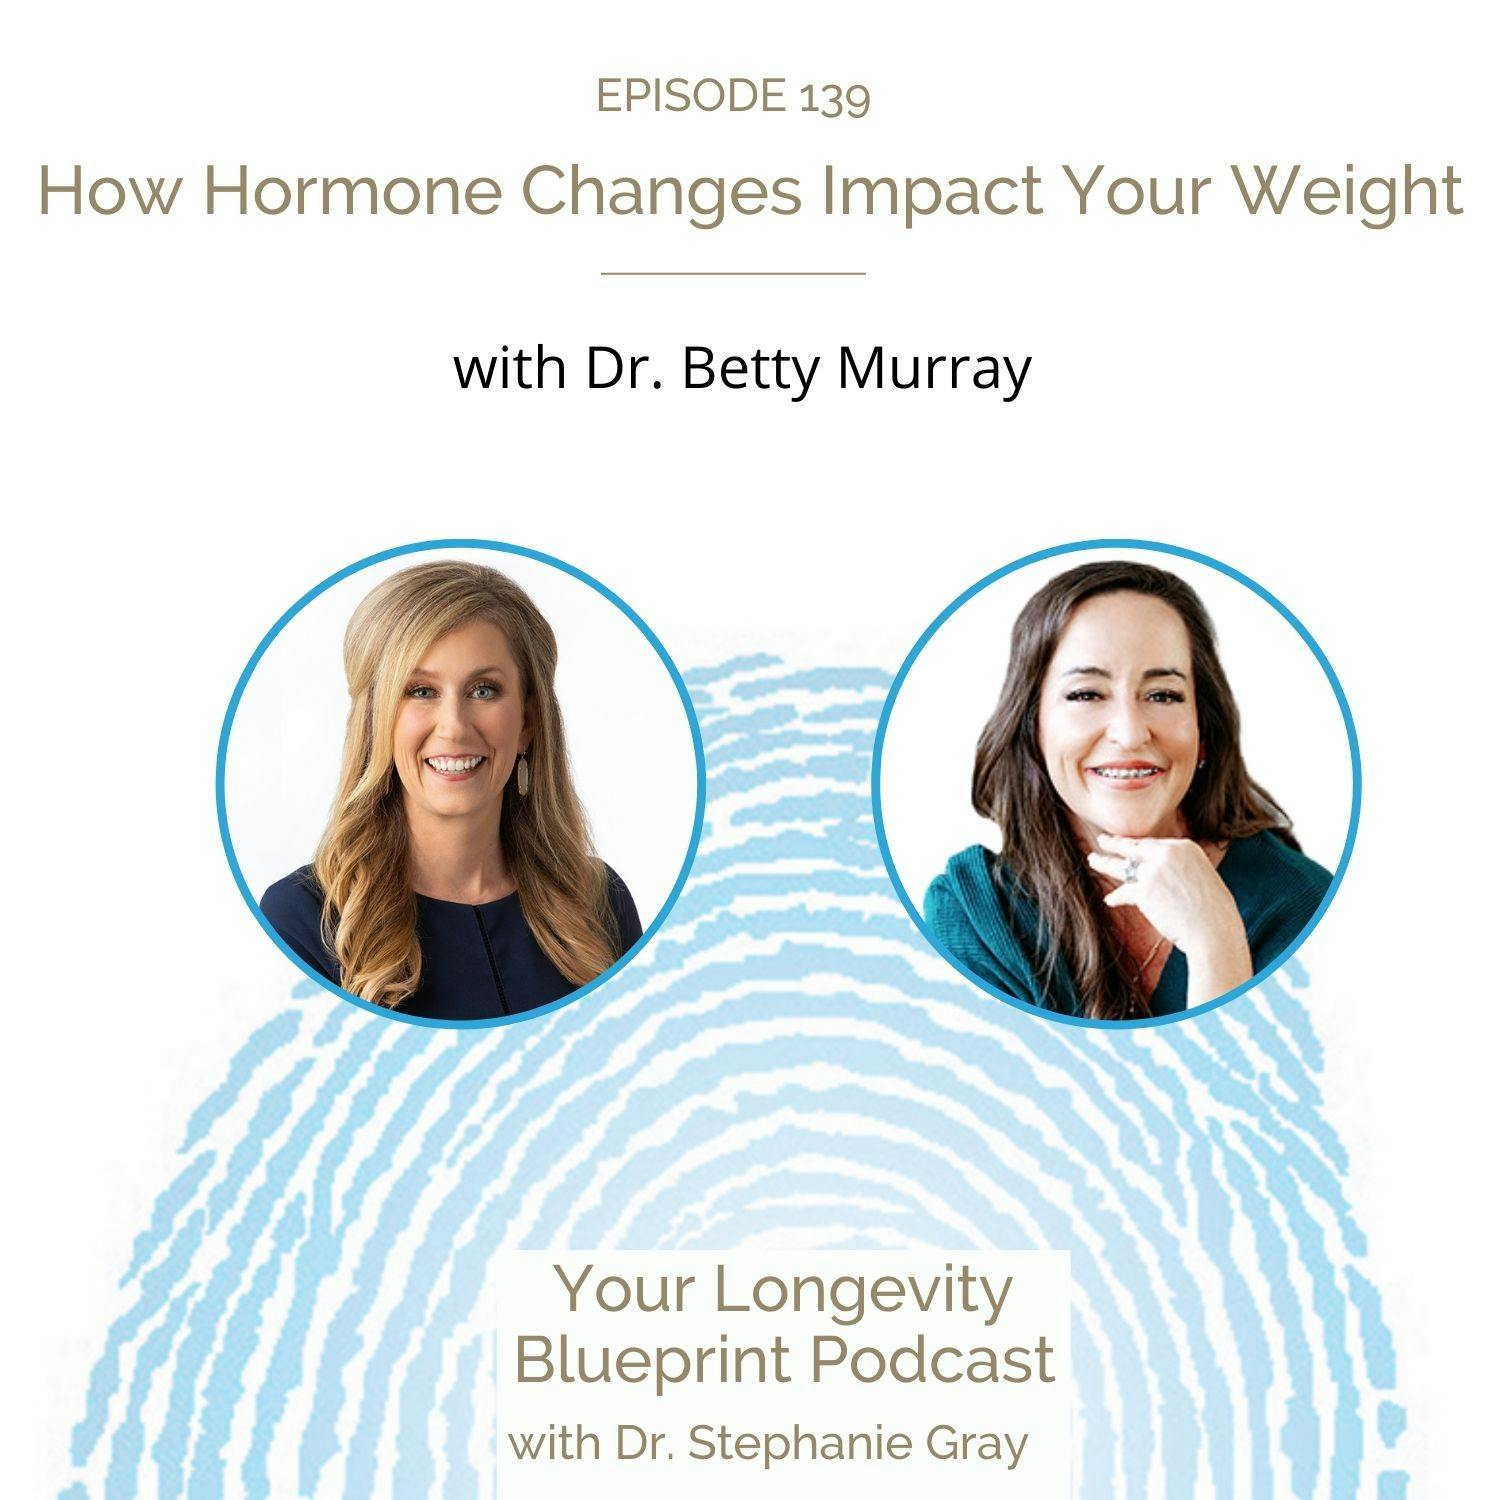 How Hormone Changes Impact Your Weight with Dr. Betty Murray